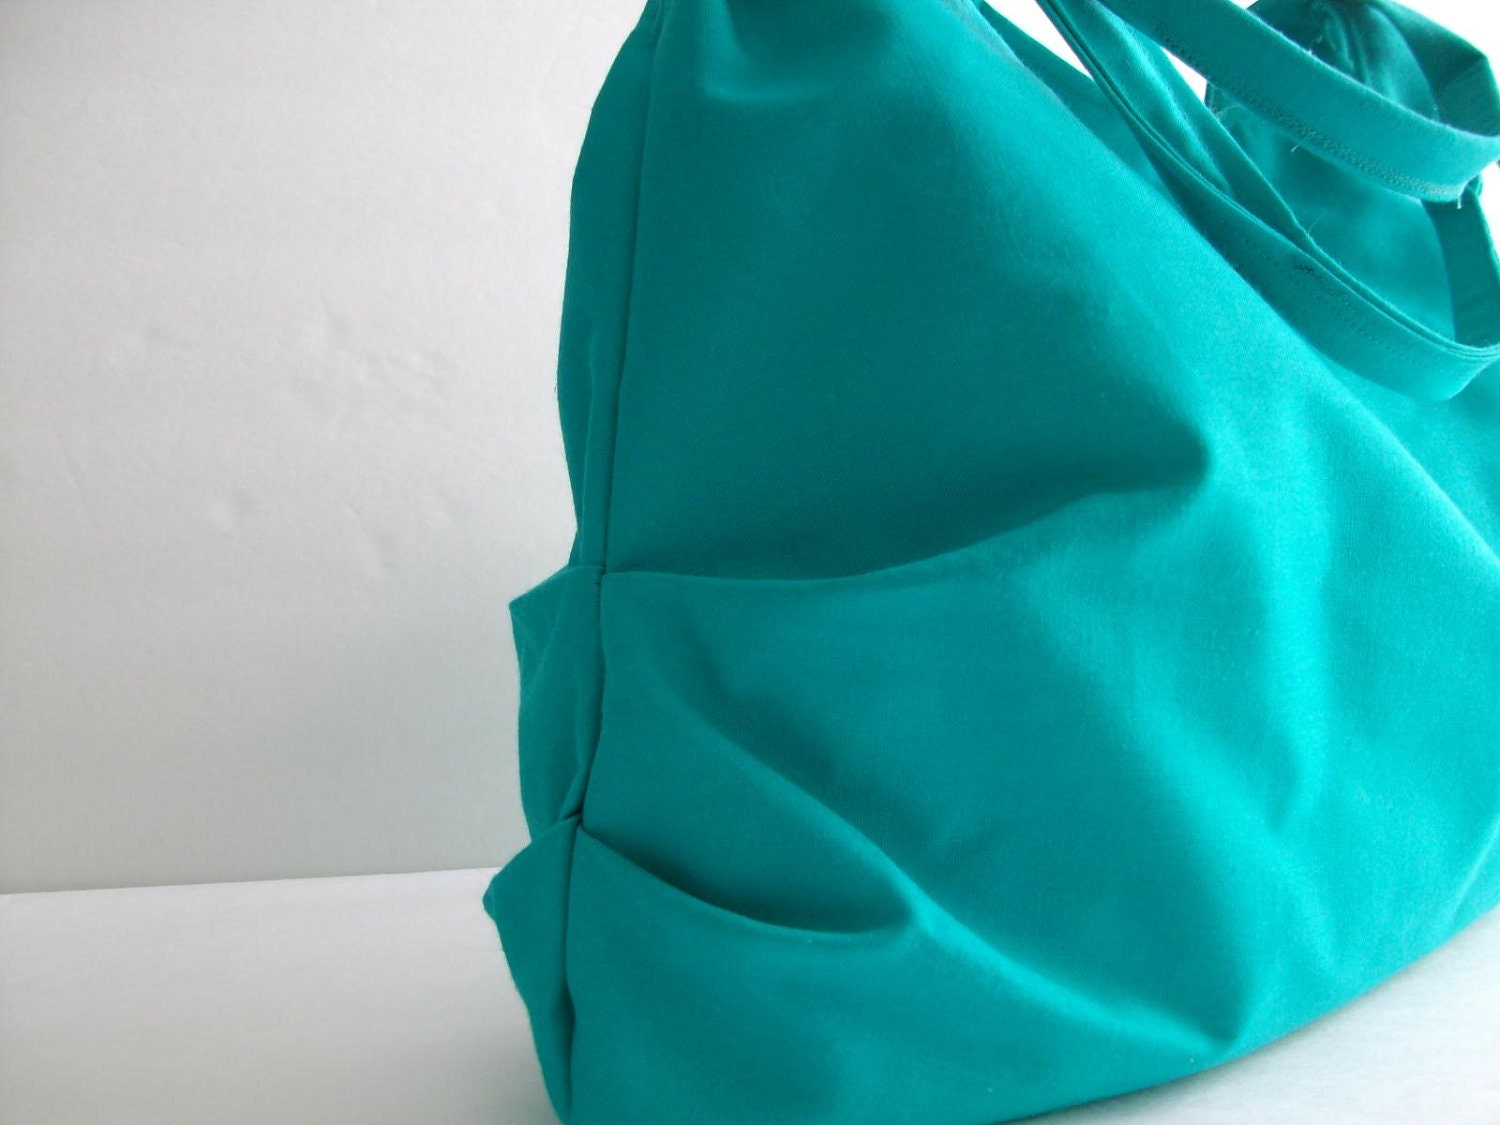 TURQOUISE HANDBAGS / blue purse / pleated bags / tote bag / spring and summer bags - Hashibags